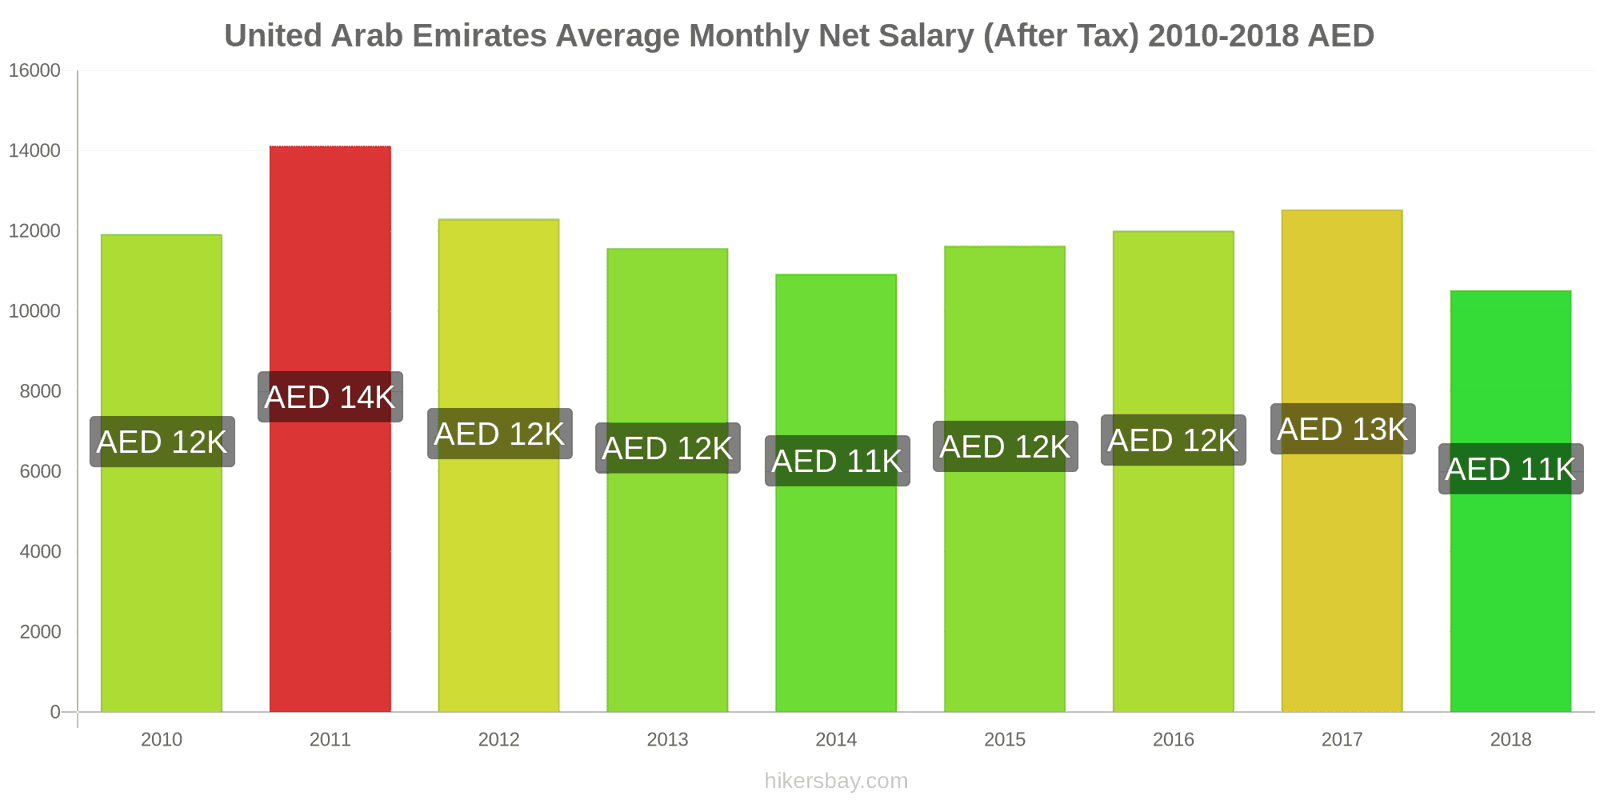 United Arab Emirates price changes Average Monthly Net Salary (After Tax) hikersbay.com